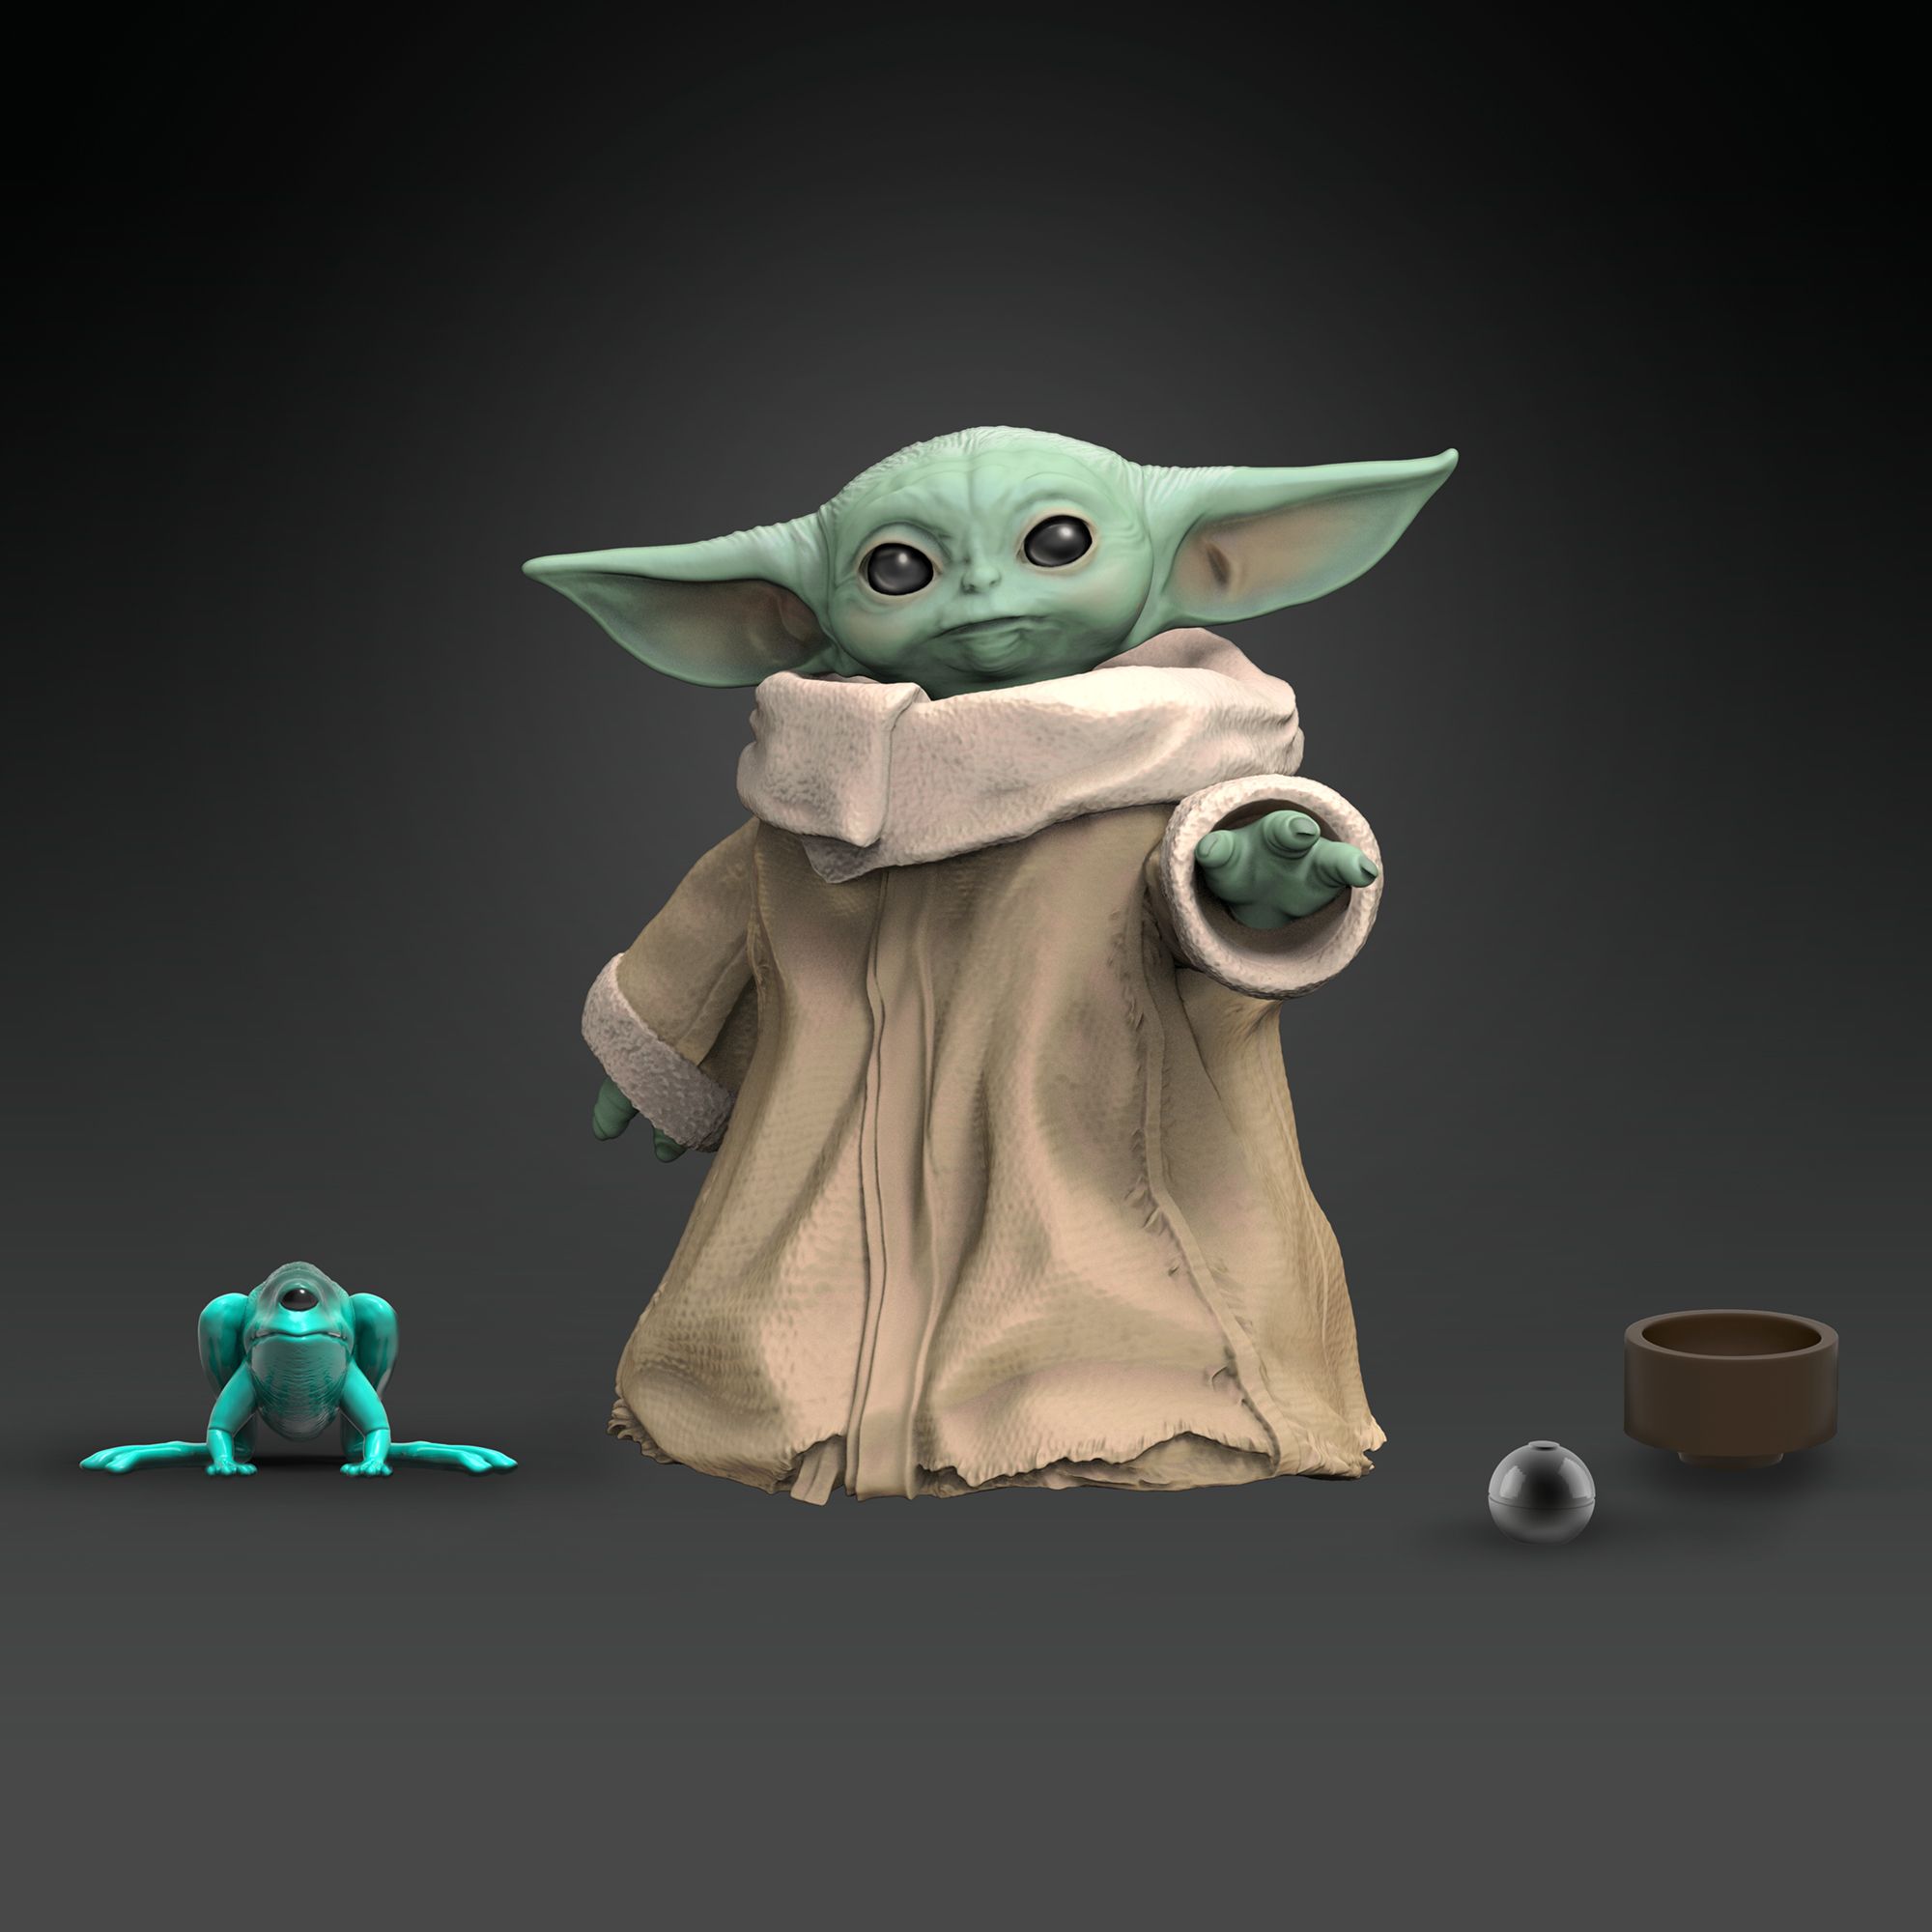 Here's how to get adorable Baby Yoda merchandise